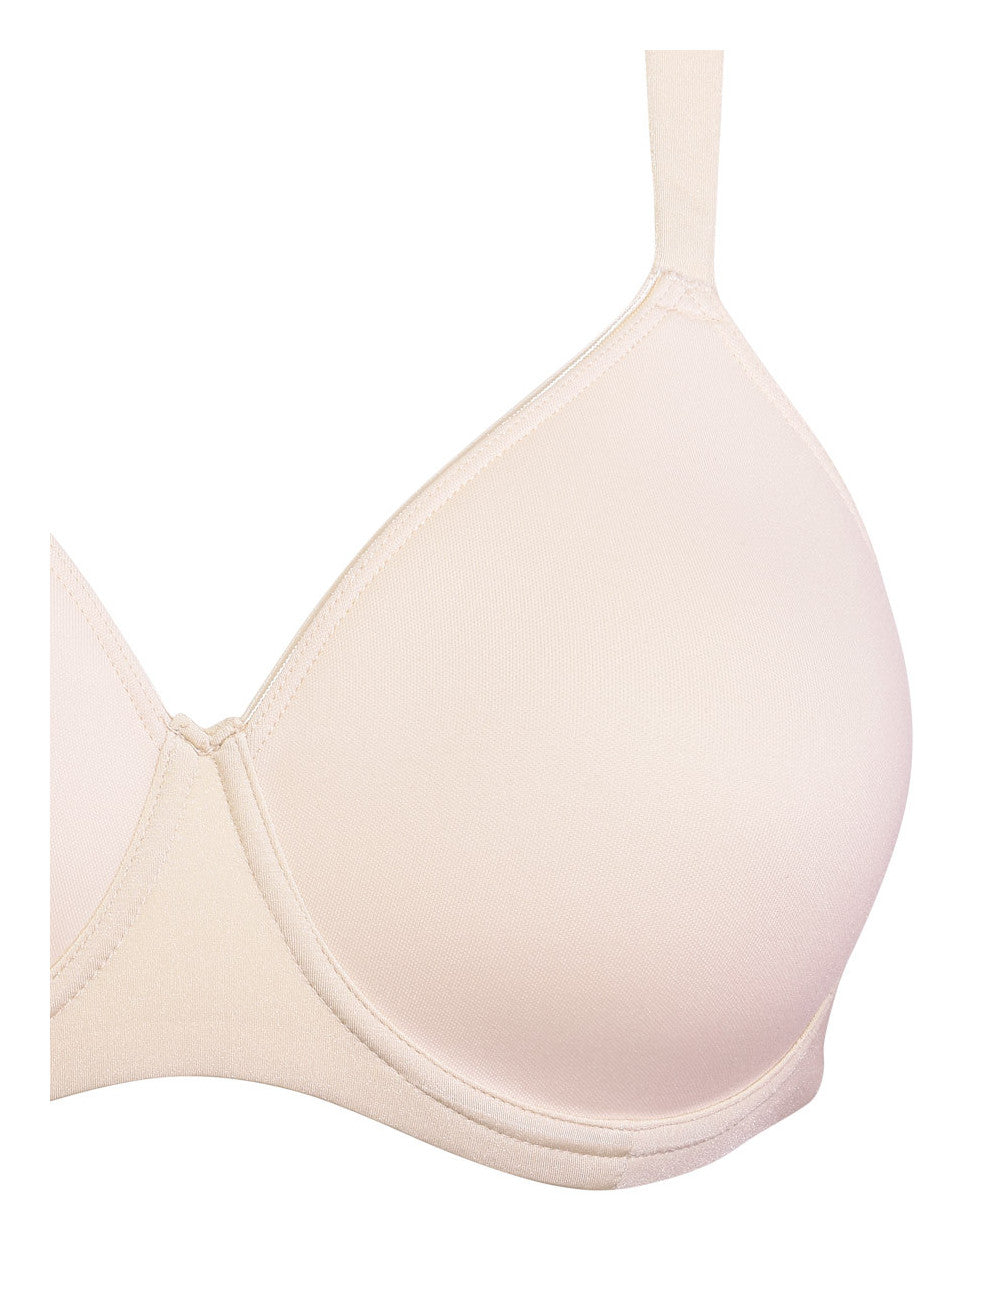 Beige, underwire spacer cup bra from the Plus line by SIéLEI from Italy.